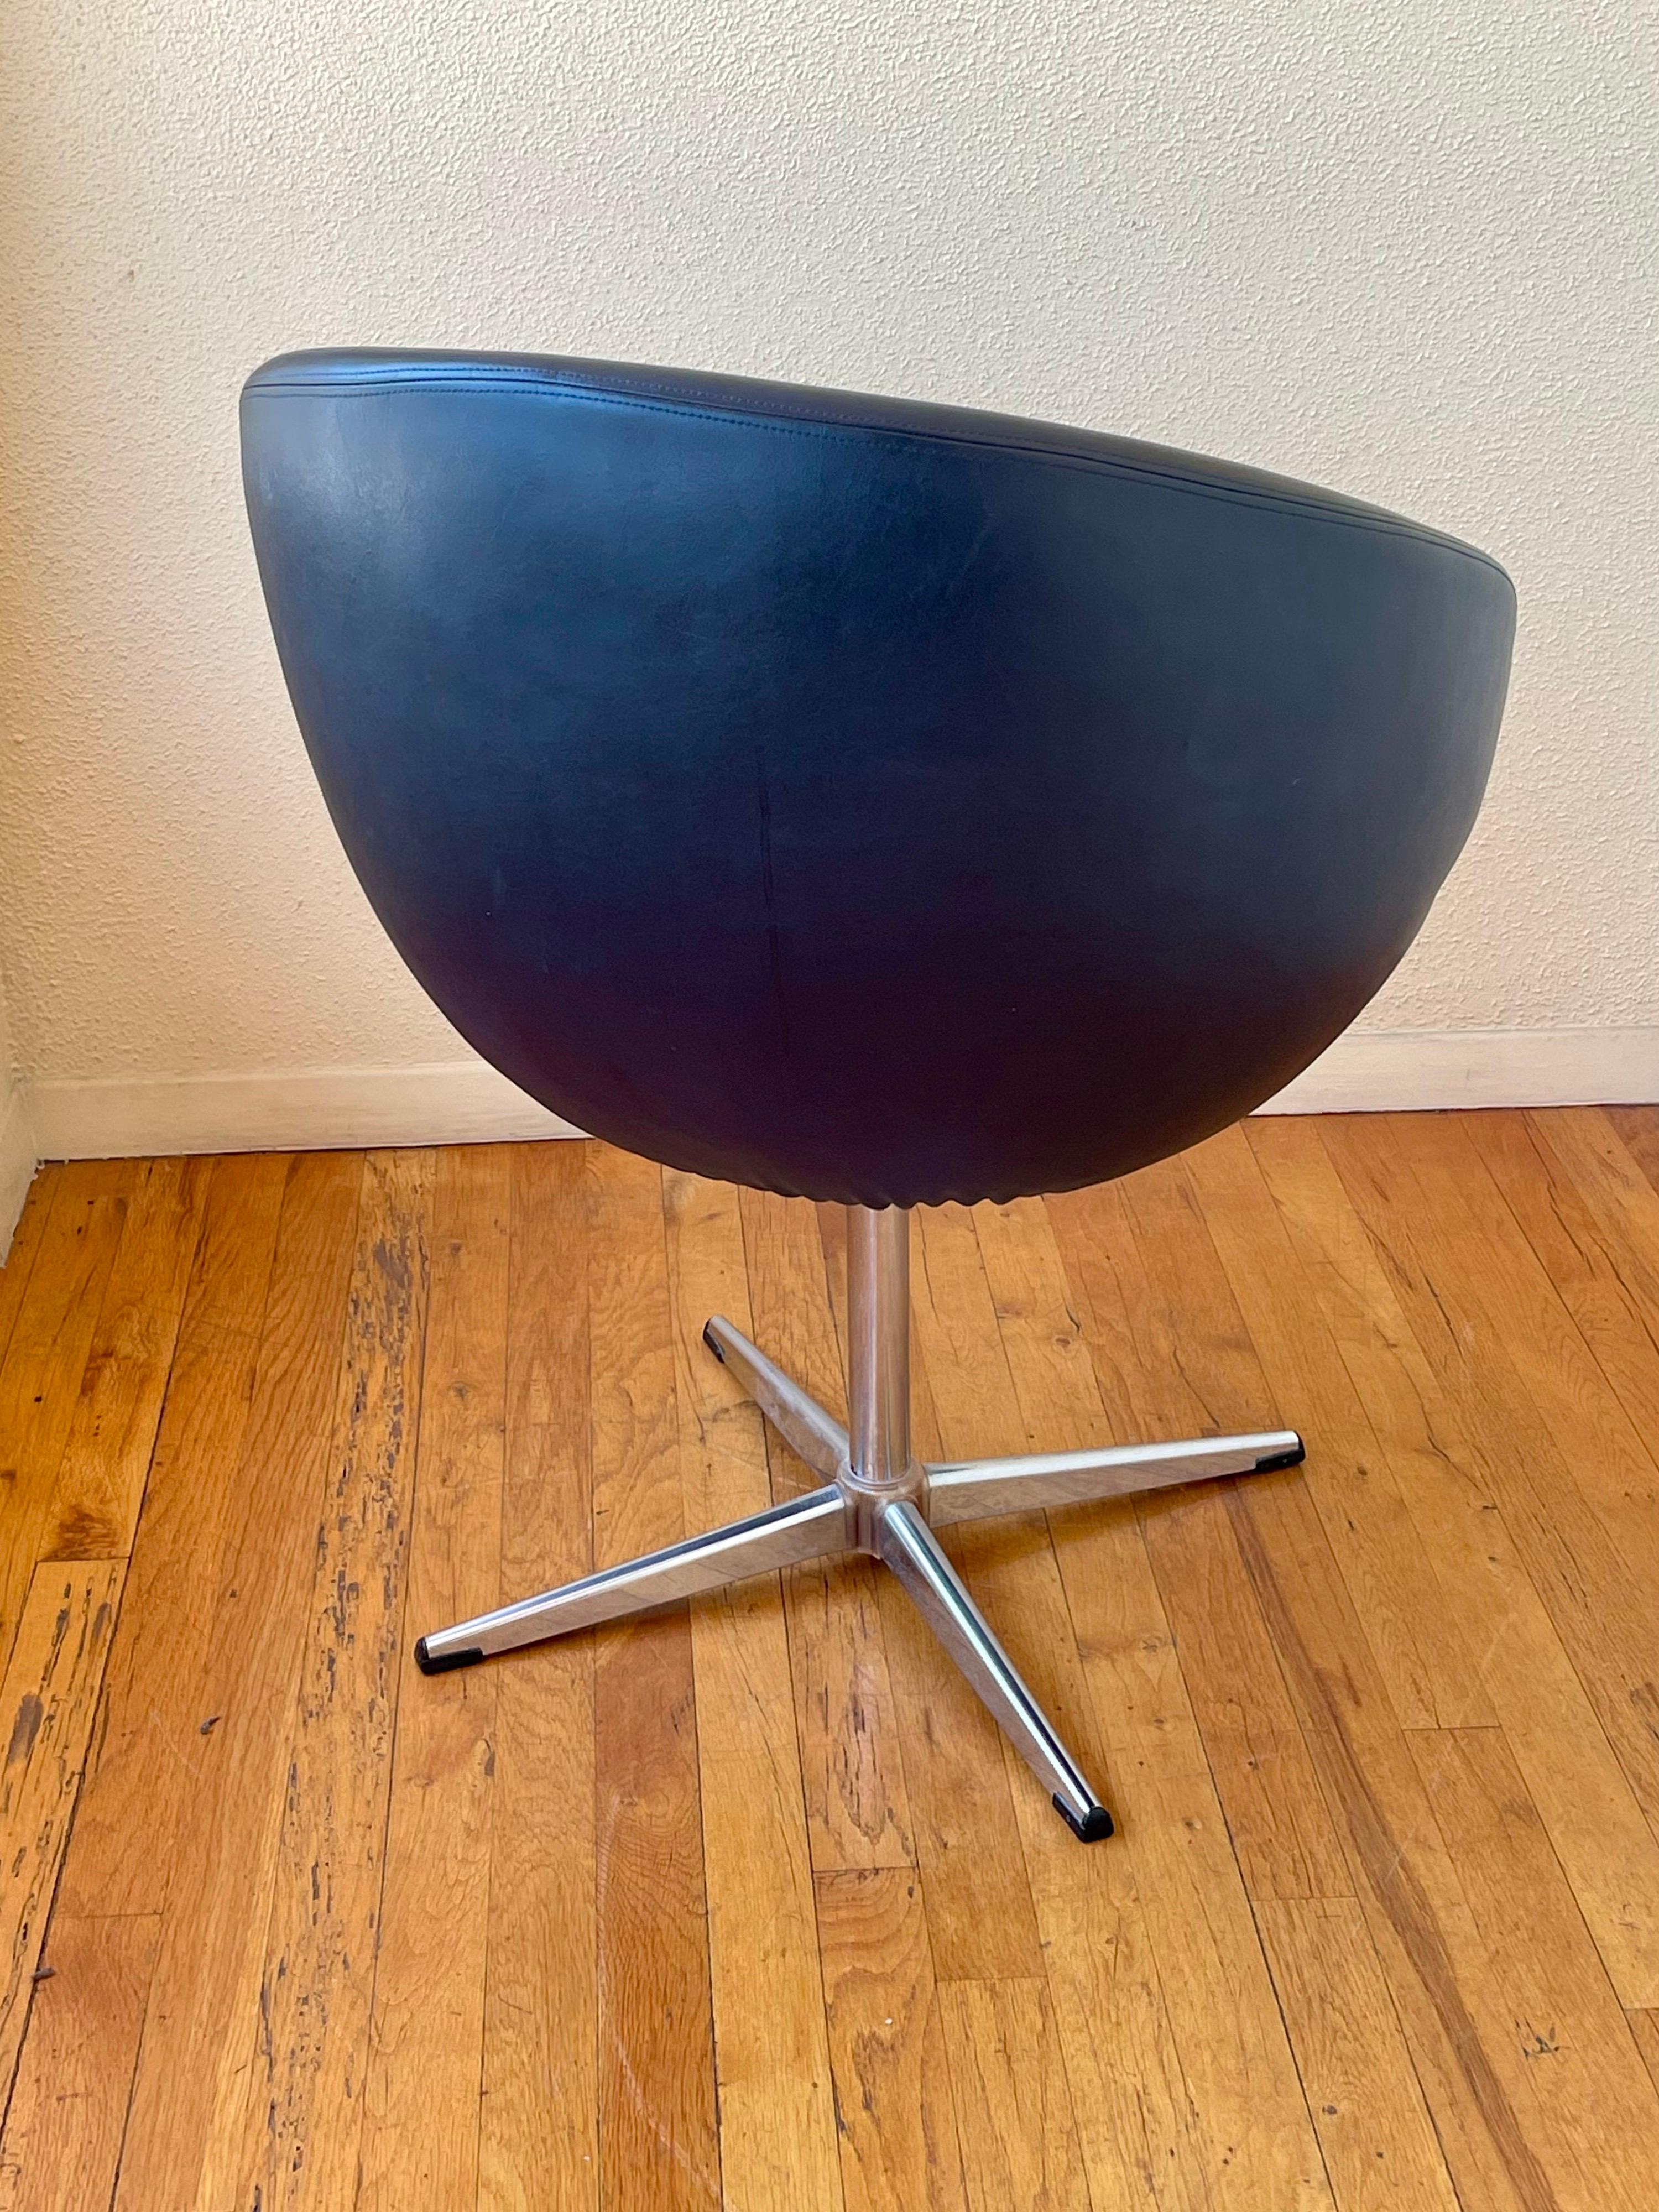 Cool swivel single chair by Overman all original black Naugahyde and chrome swivel base, circa 1960's, good original condition some wear due to age.